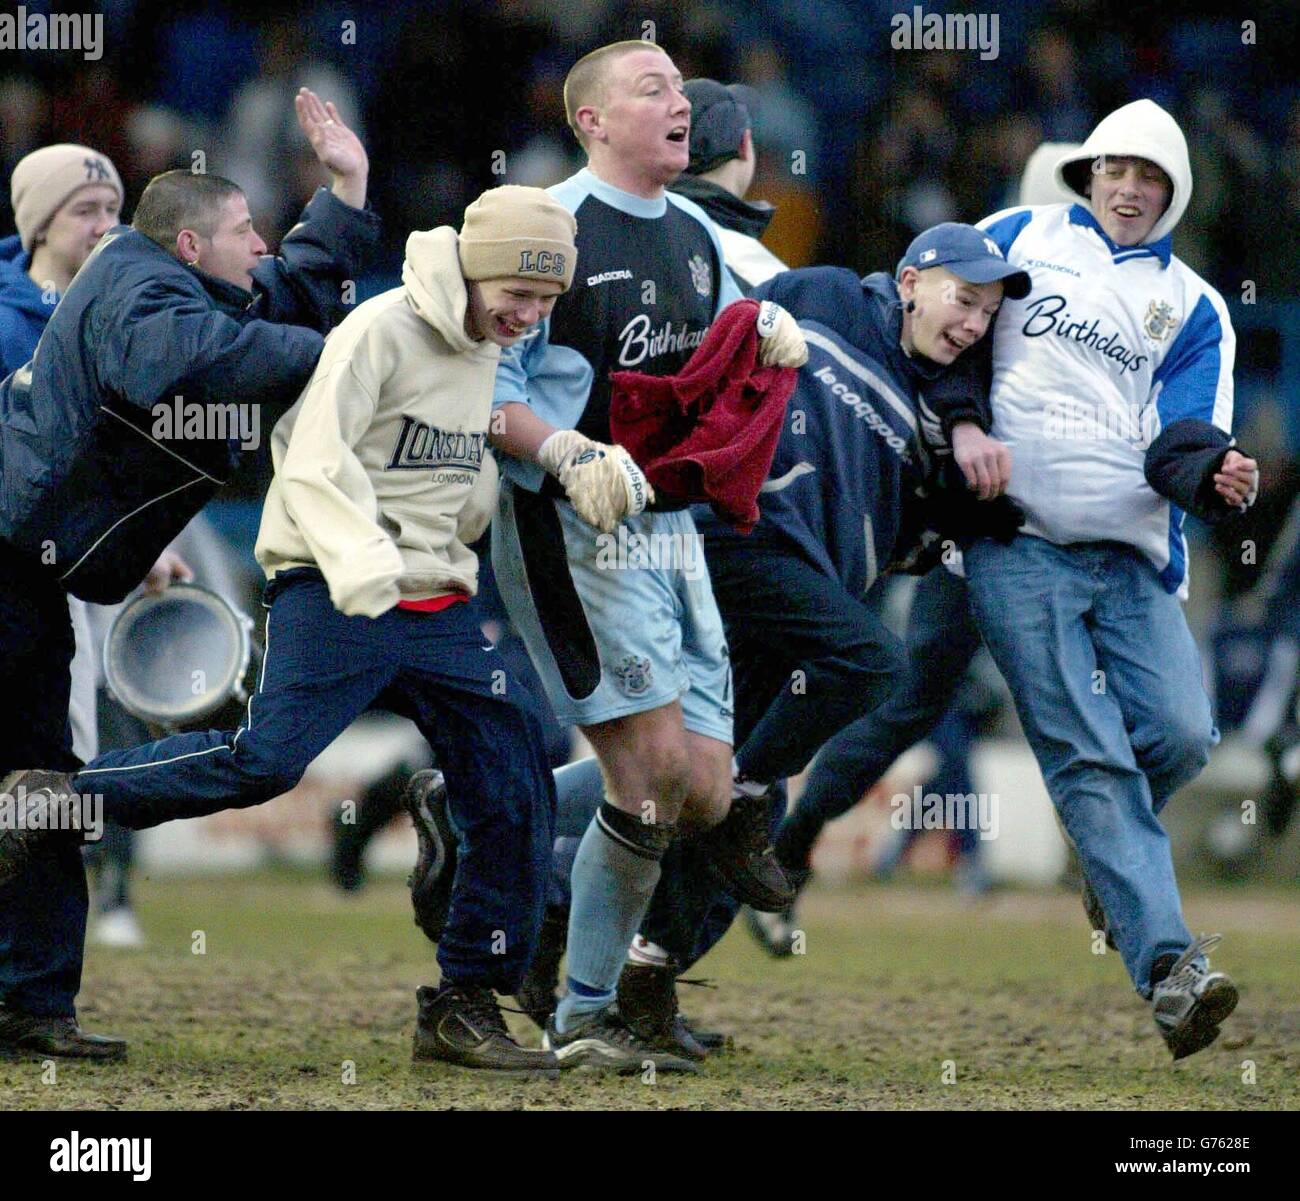 Bury's goalkeeper Paddy Kenny mobbed my fans in a pitch invasion after Bury's match with visitors Bournemouth in the Nationwide Division Two match at Bury's Gigg Lane ground. NO UNOFFICIAL CLUB WEBSITE USE. Stock Photo